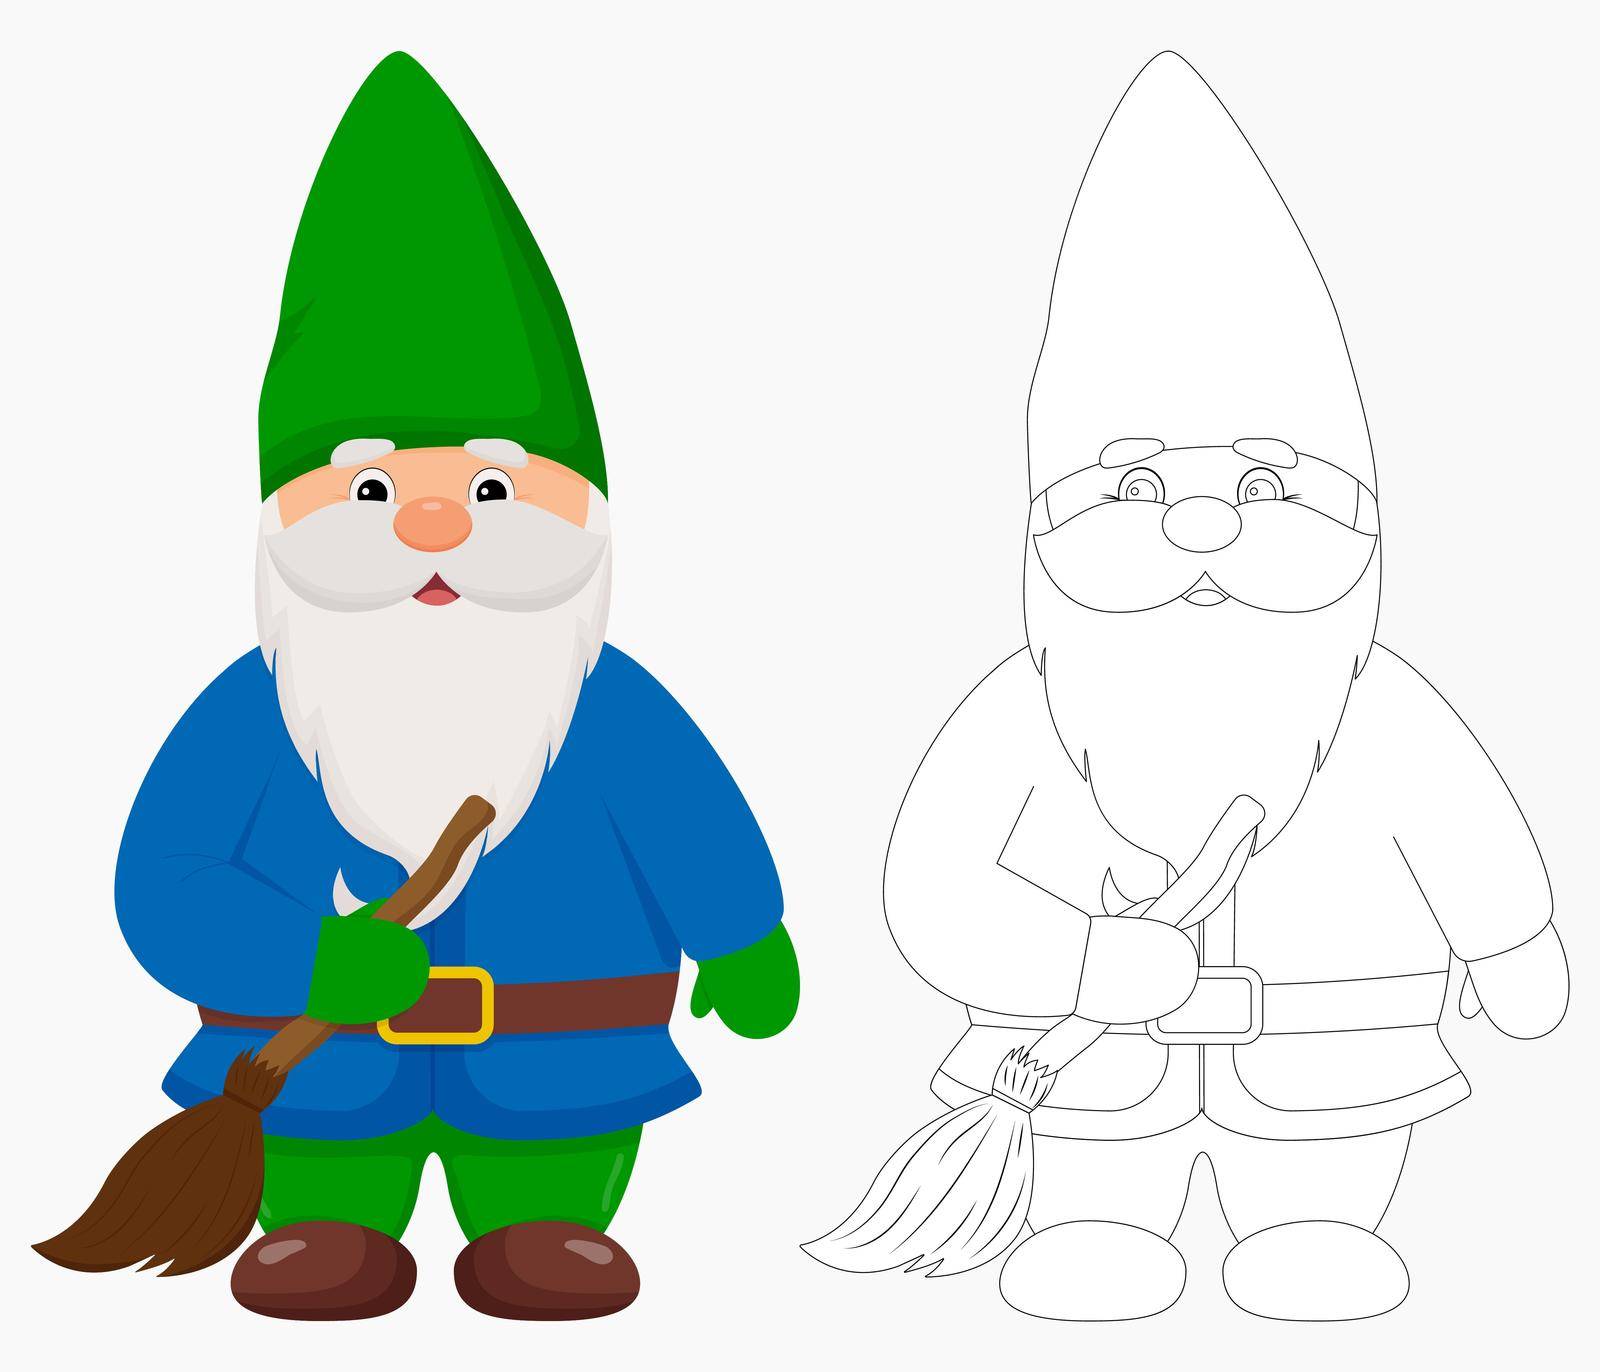 Cute garden gnome with a broom in his hands. Gnome in color and outline